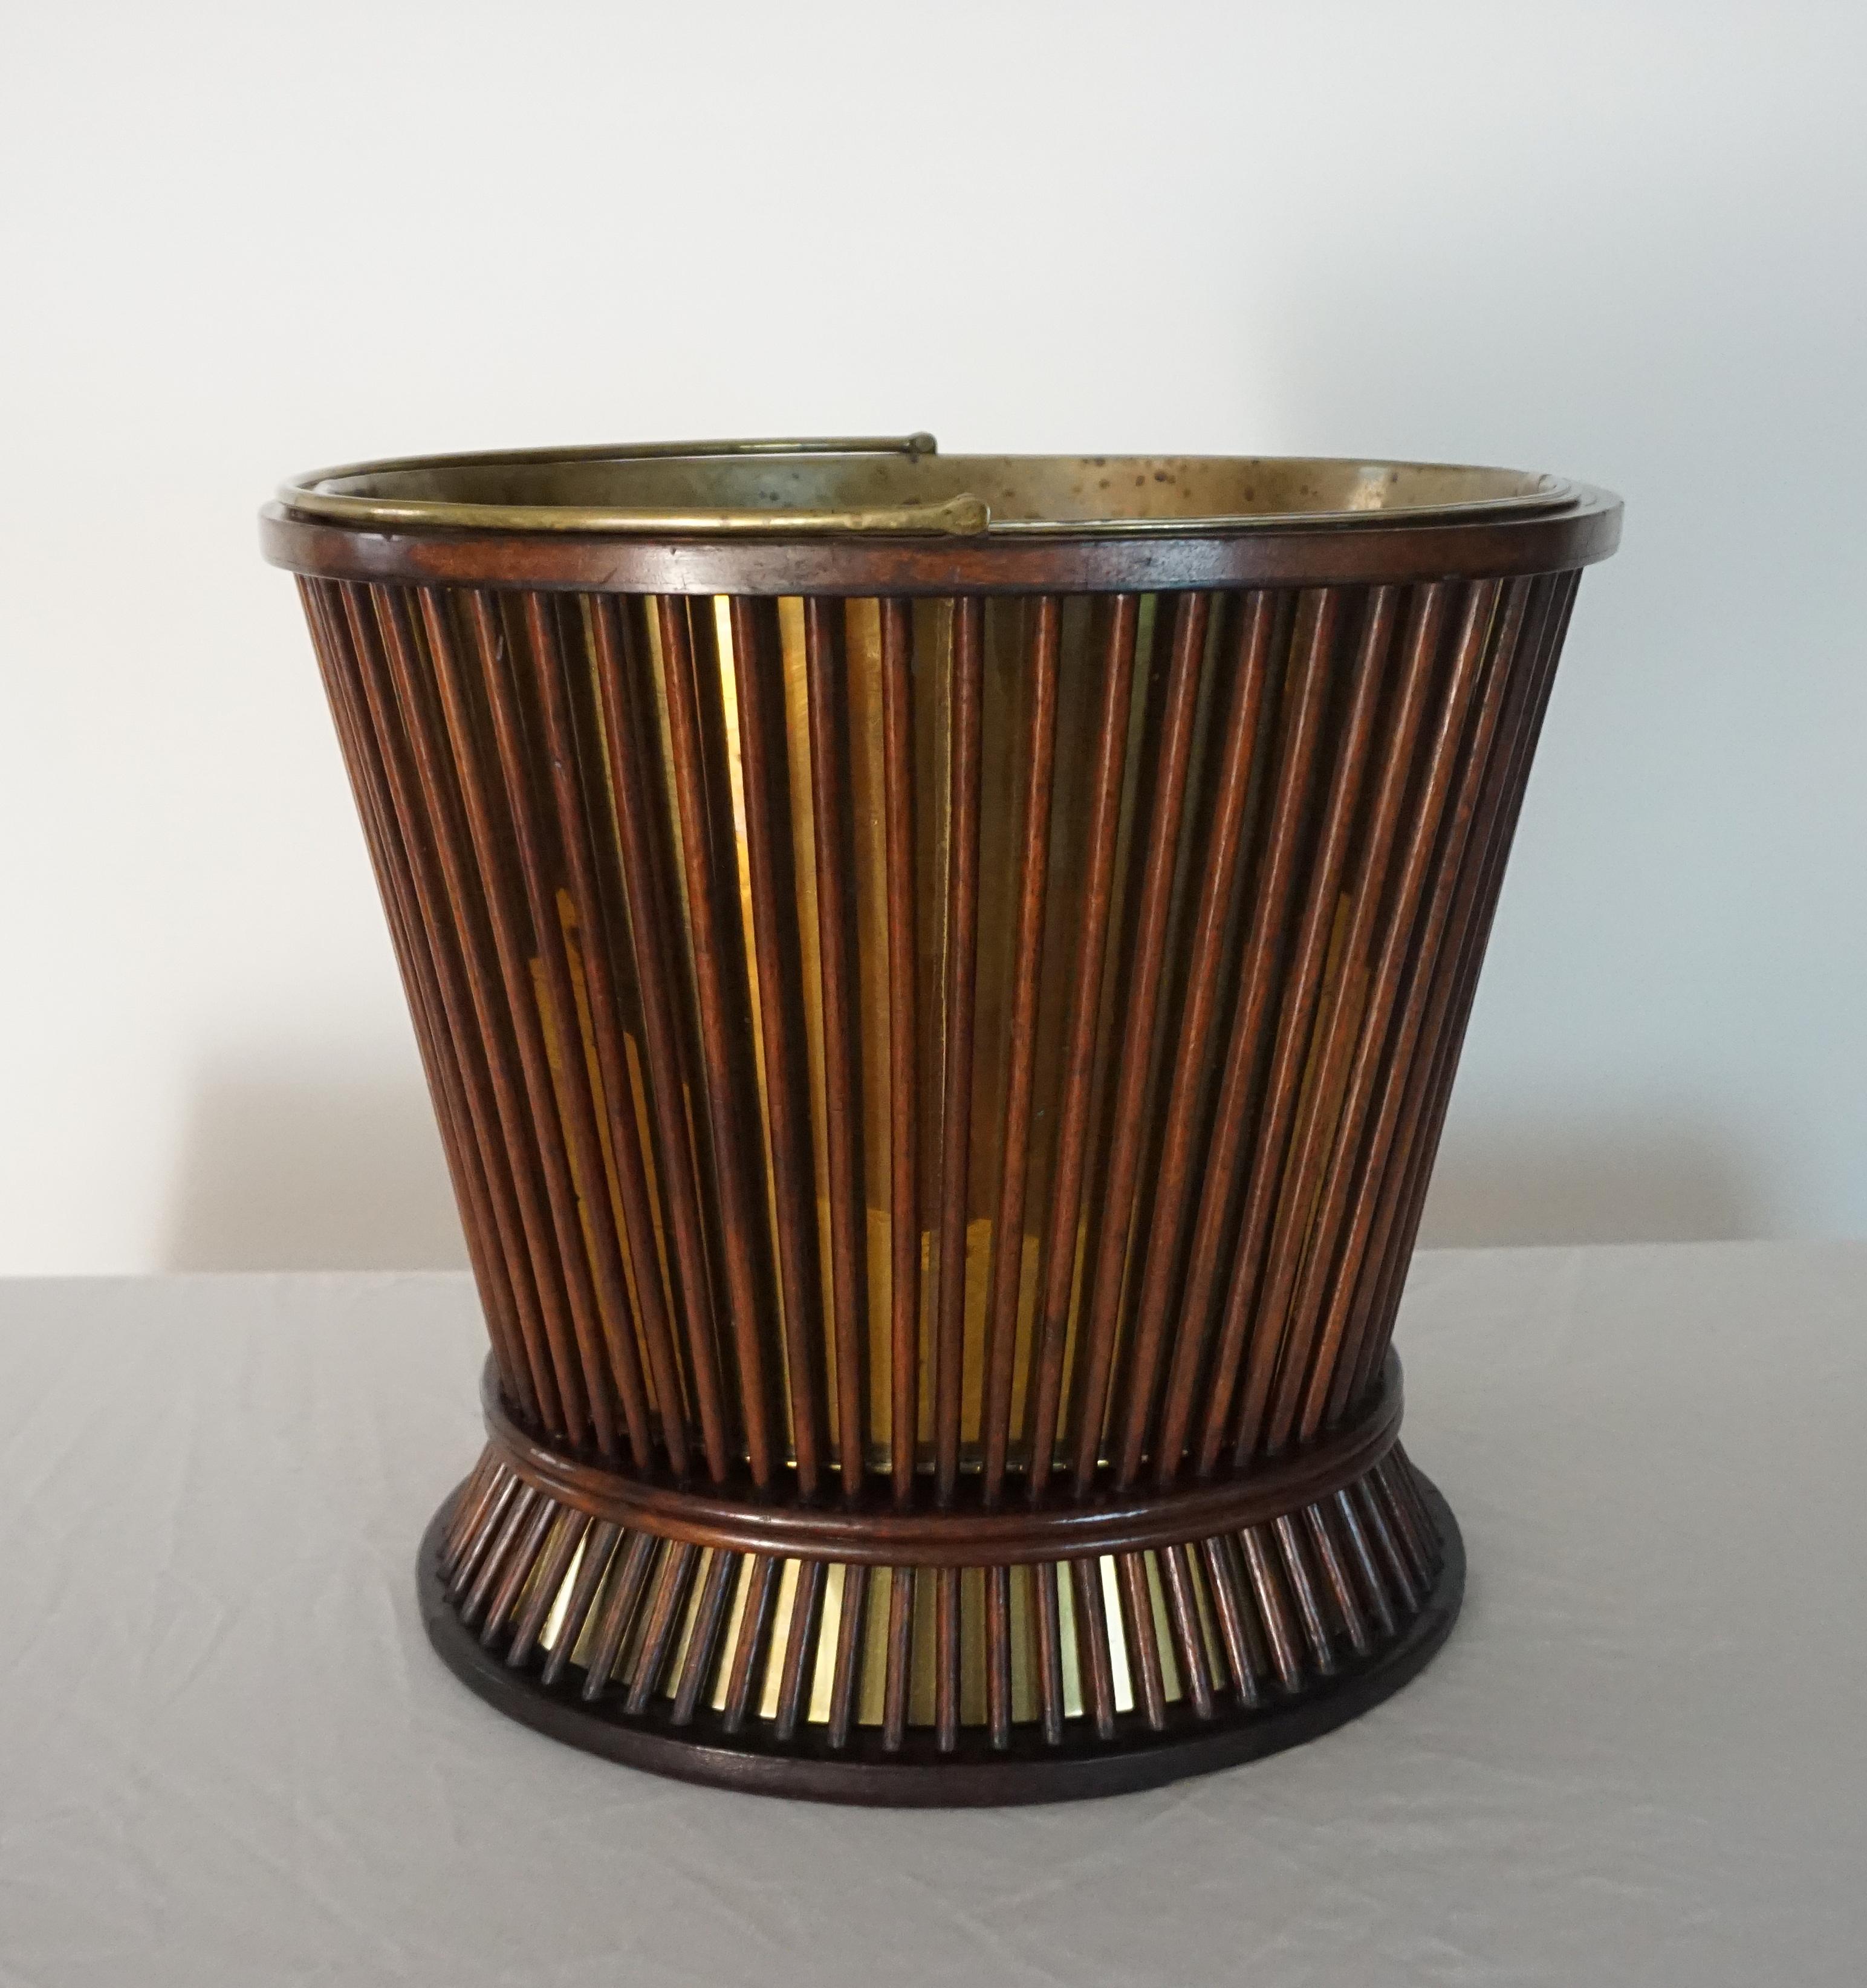 A rare and unusual George III circa 1800 peat, turf, coal, or kindling bucket of 'waisted' form having top handle and mahogany reeded spindle design with original brass liner inserts both top and bottom. Can also be repurposed as a very chic waste